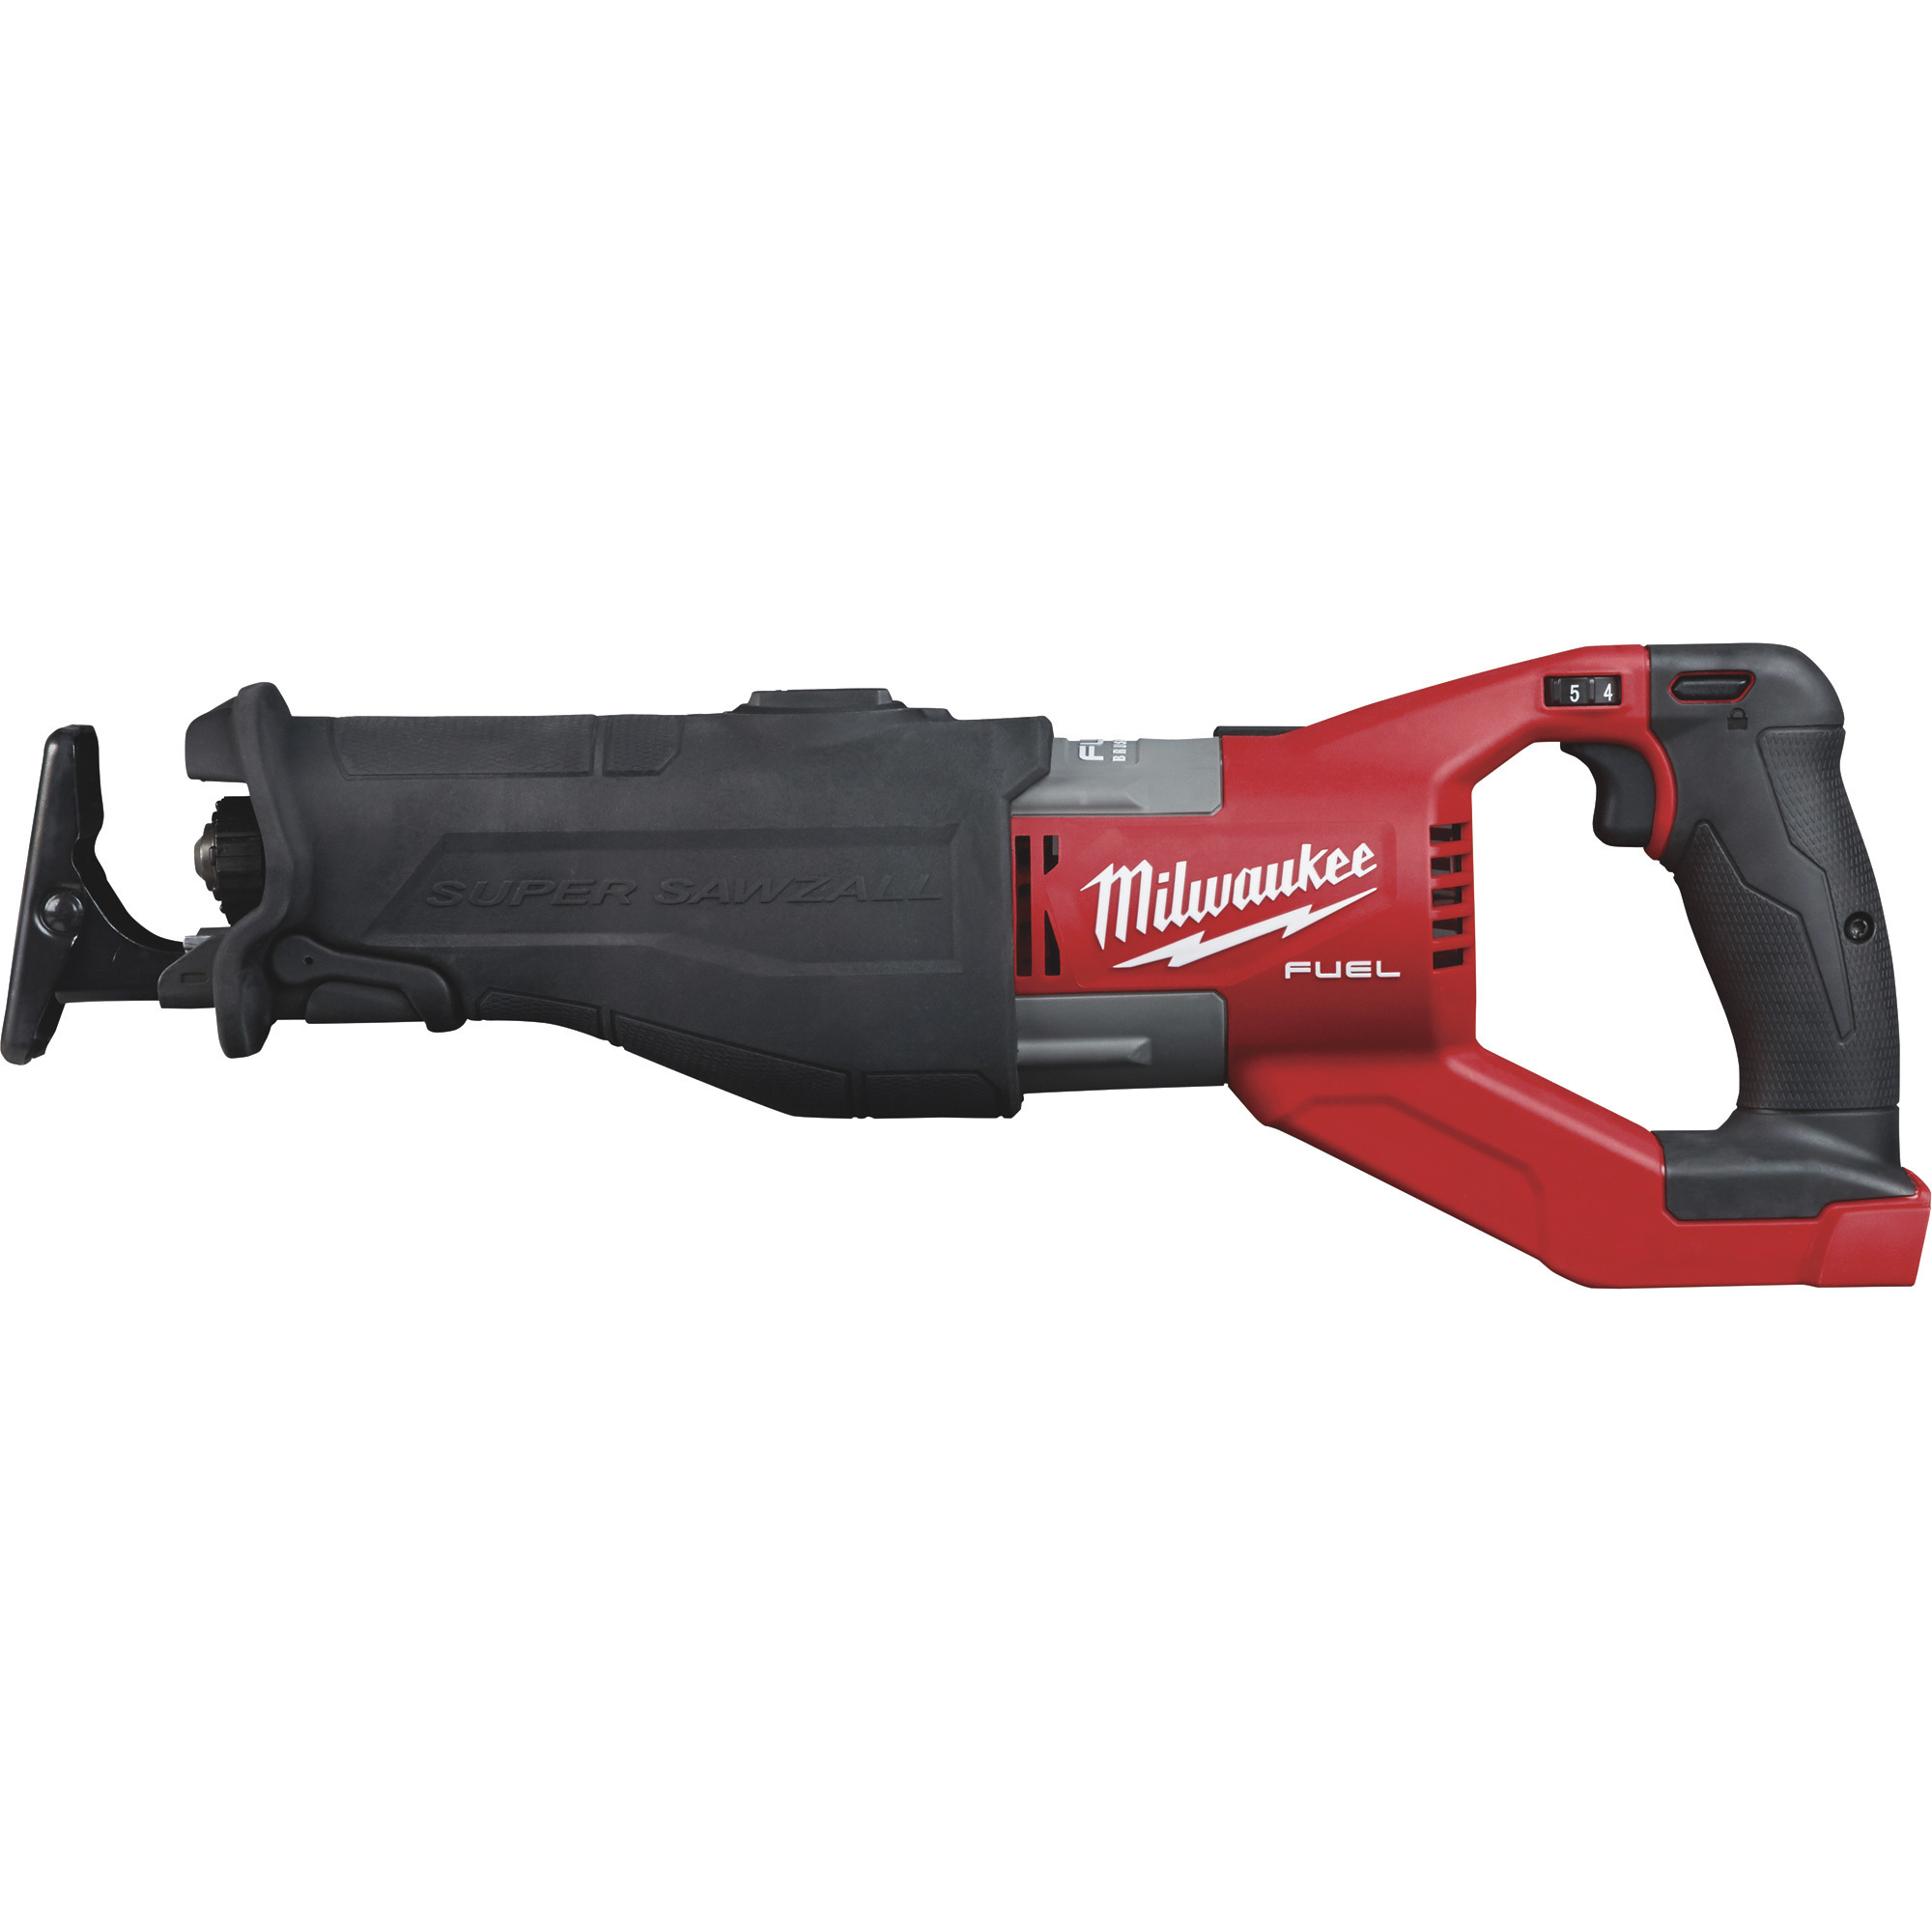 Milwaukee M18 FUEL Super Sawzall, Tool Only, Model 2722-20